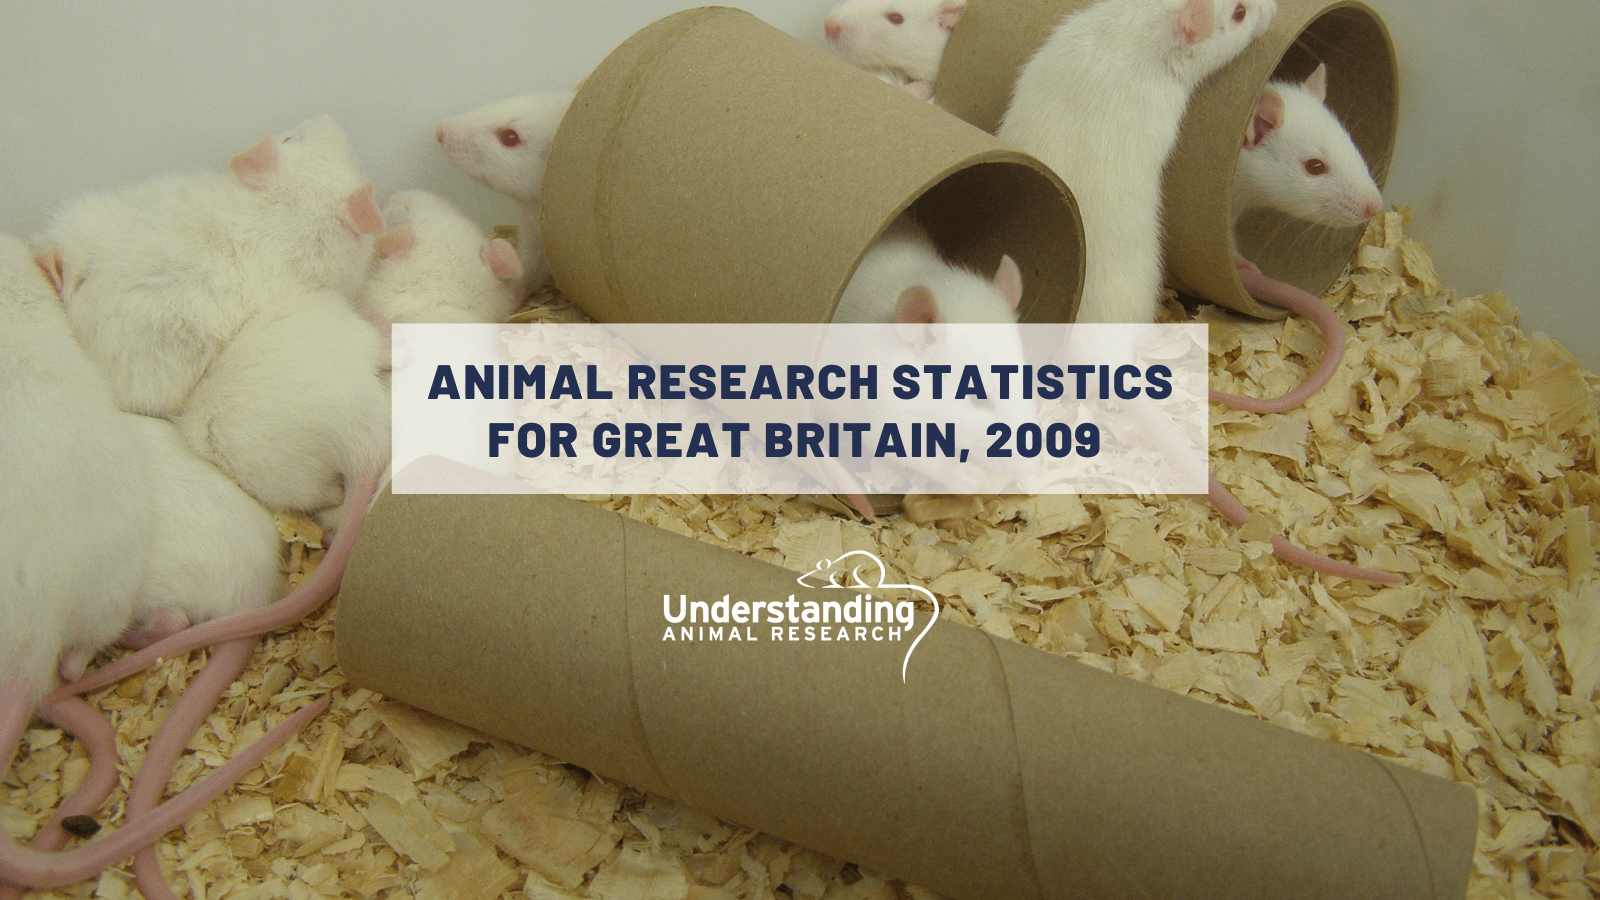 Animal research statistics for Great Britain, 2009